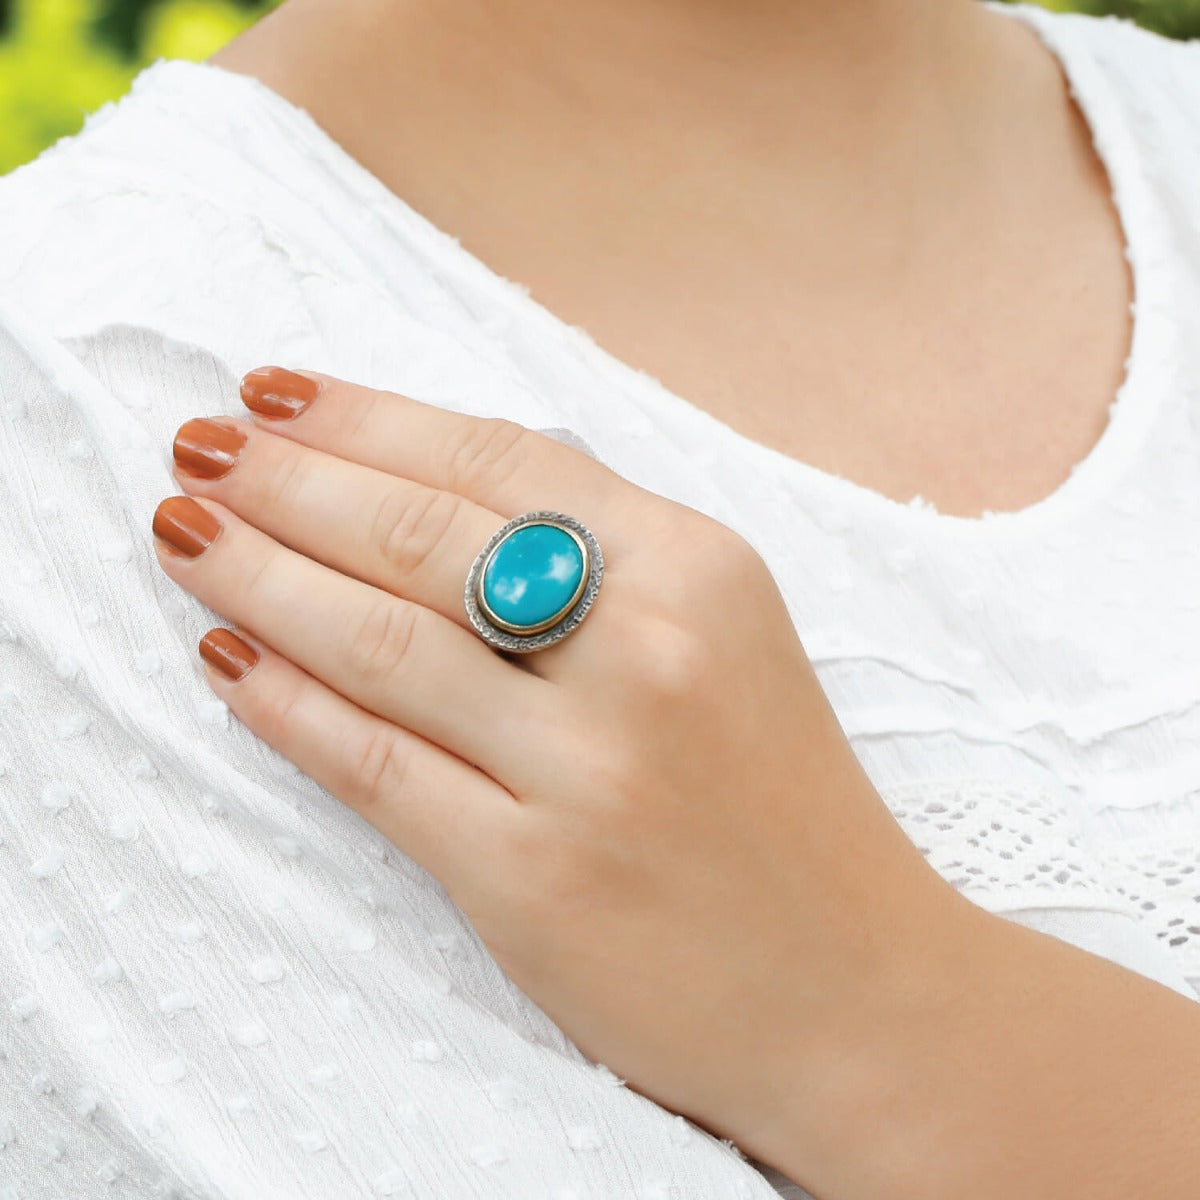 turquoise ring, buy silver ring, sterling silver ring, gemstone ring, buy sterling silver ring, buy gemstone jewelry, buy jewelry online, turquoise jewelry